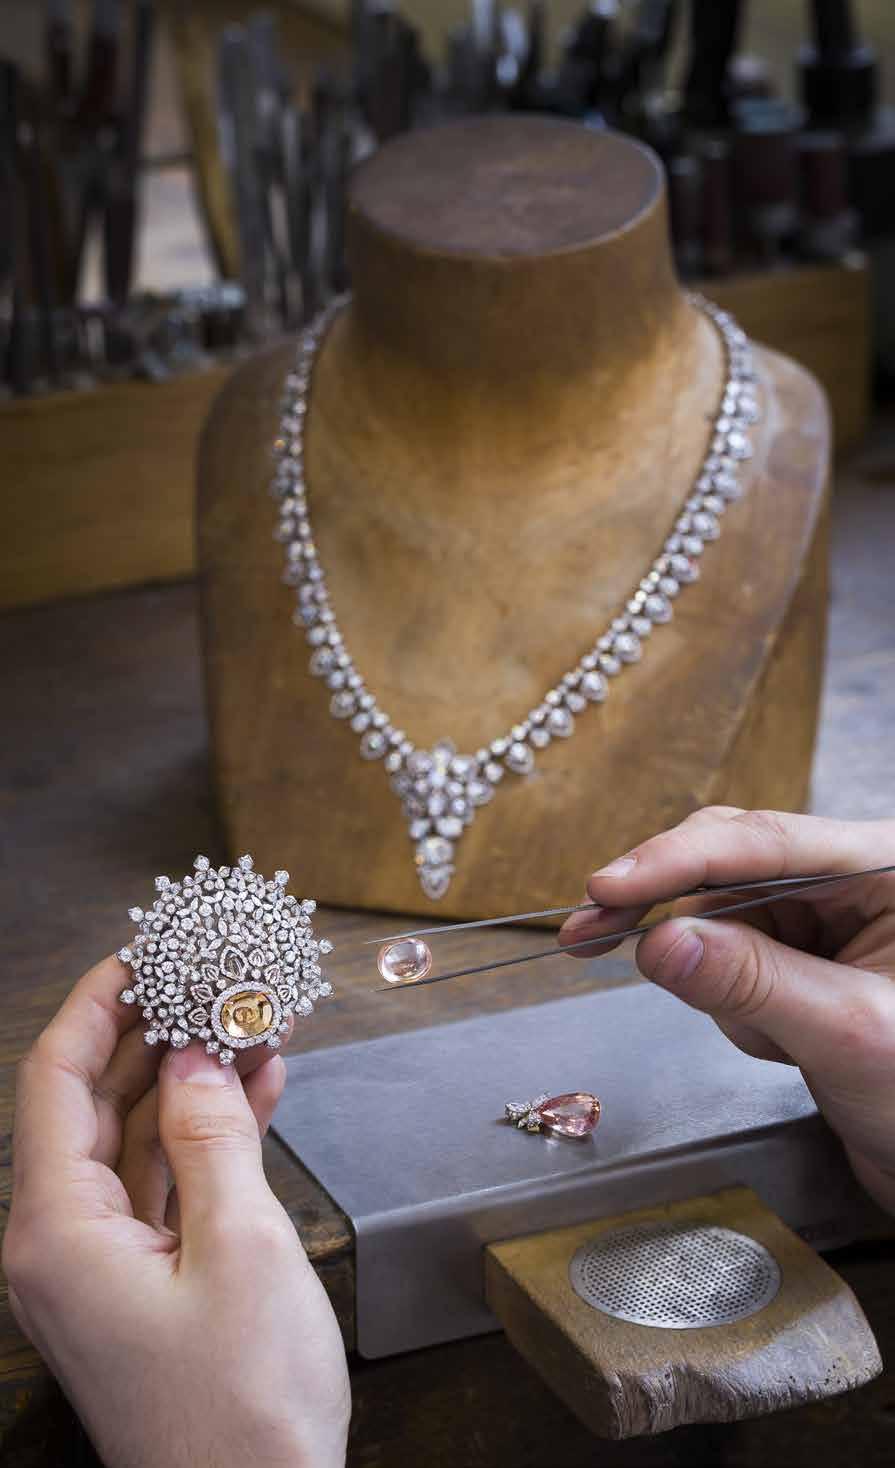 Making of the Transformable Necklace with positioning of the 9.03-carat cabochon-cut Padparadscha sapphire; Promenades Impériales, Les Mondes de Chaumet. www.chaumet.